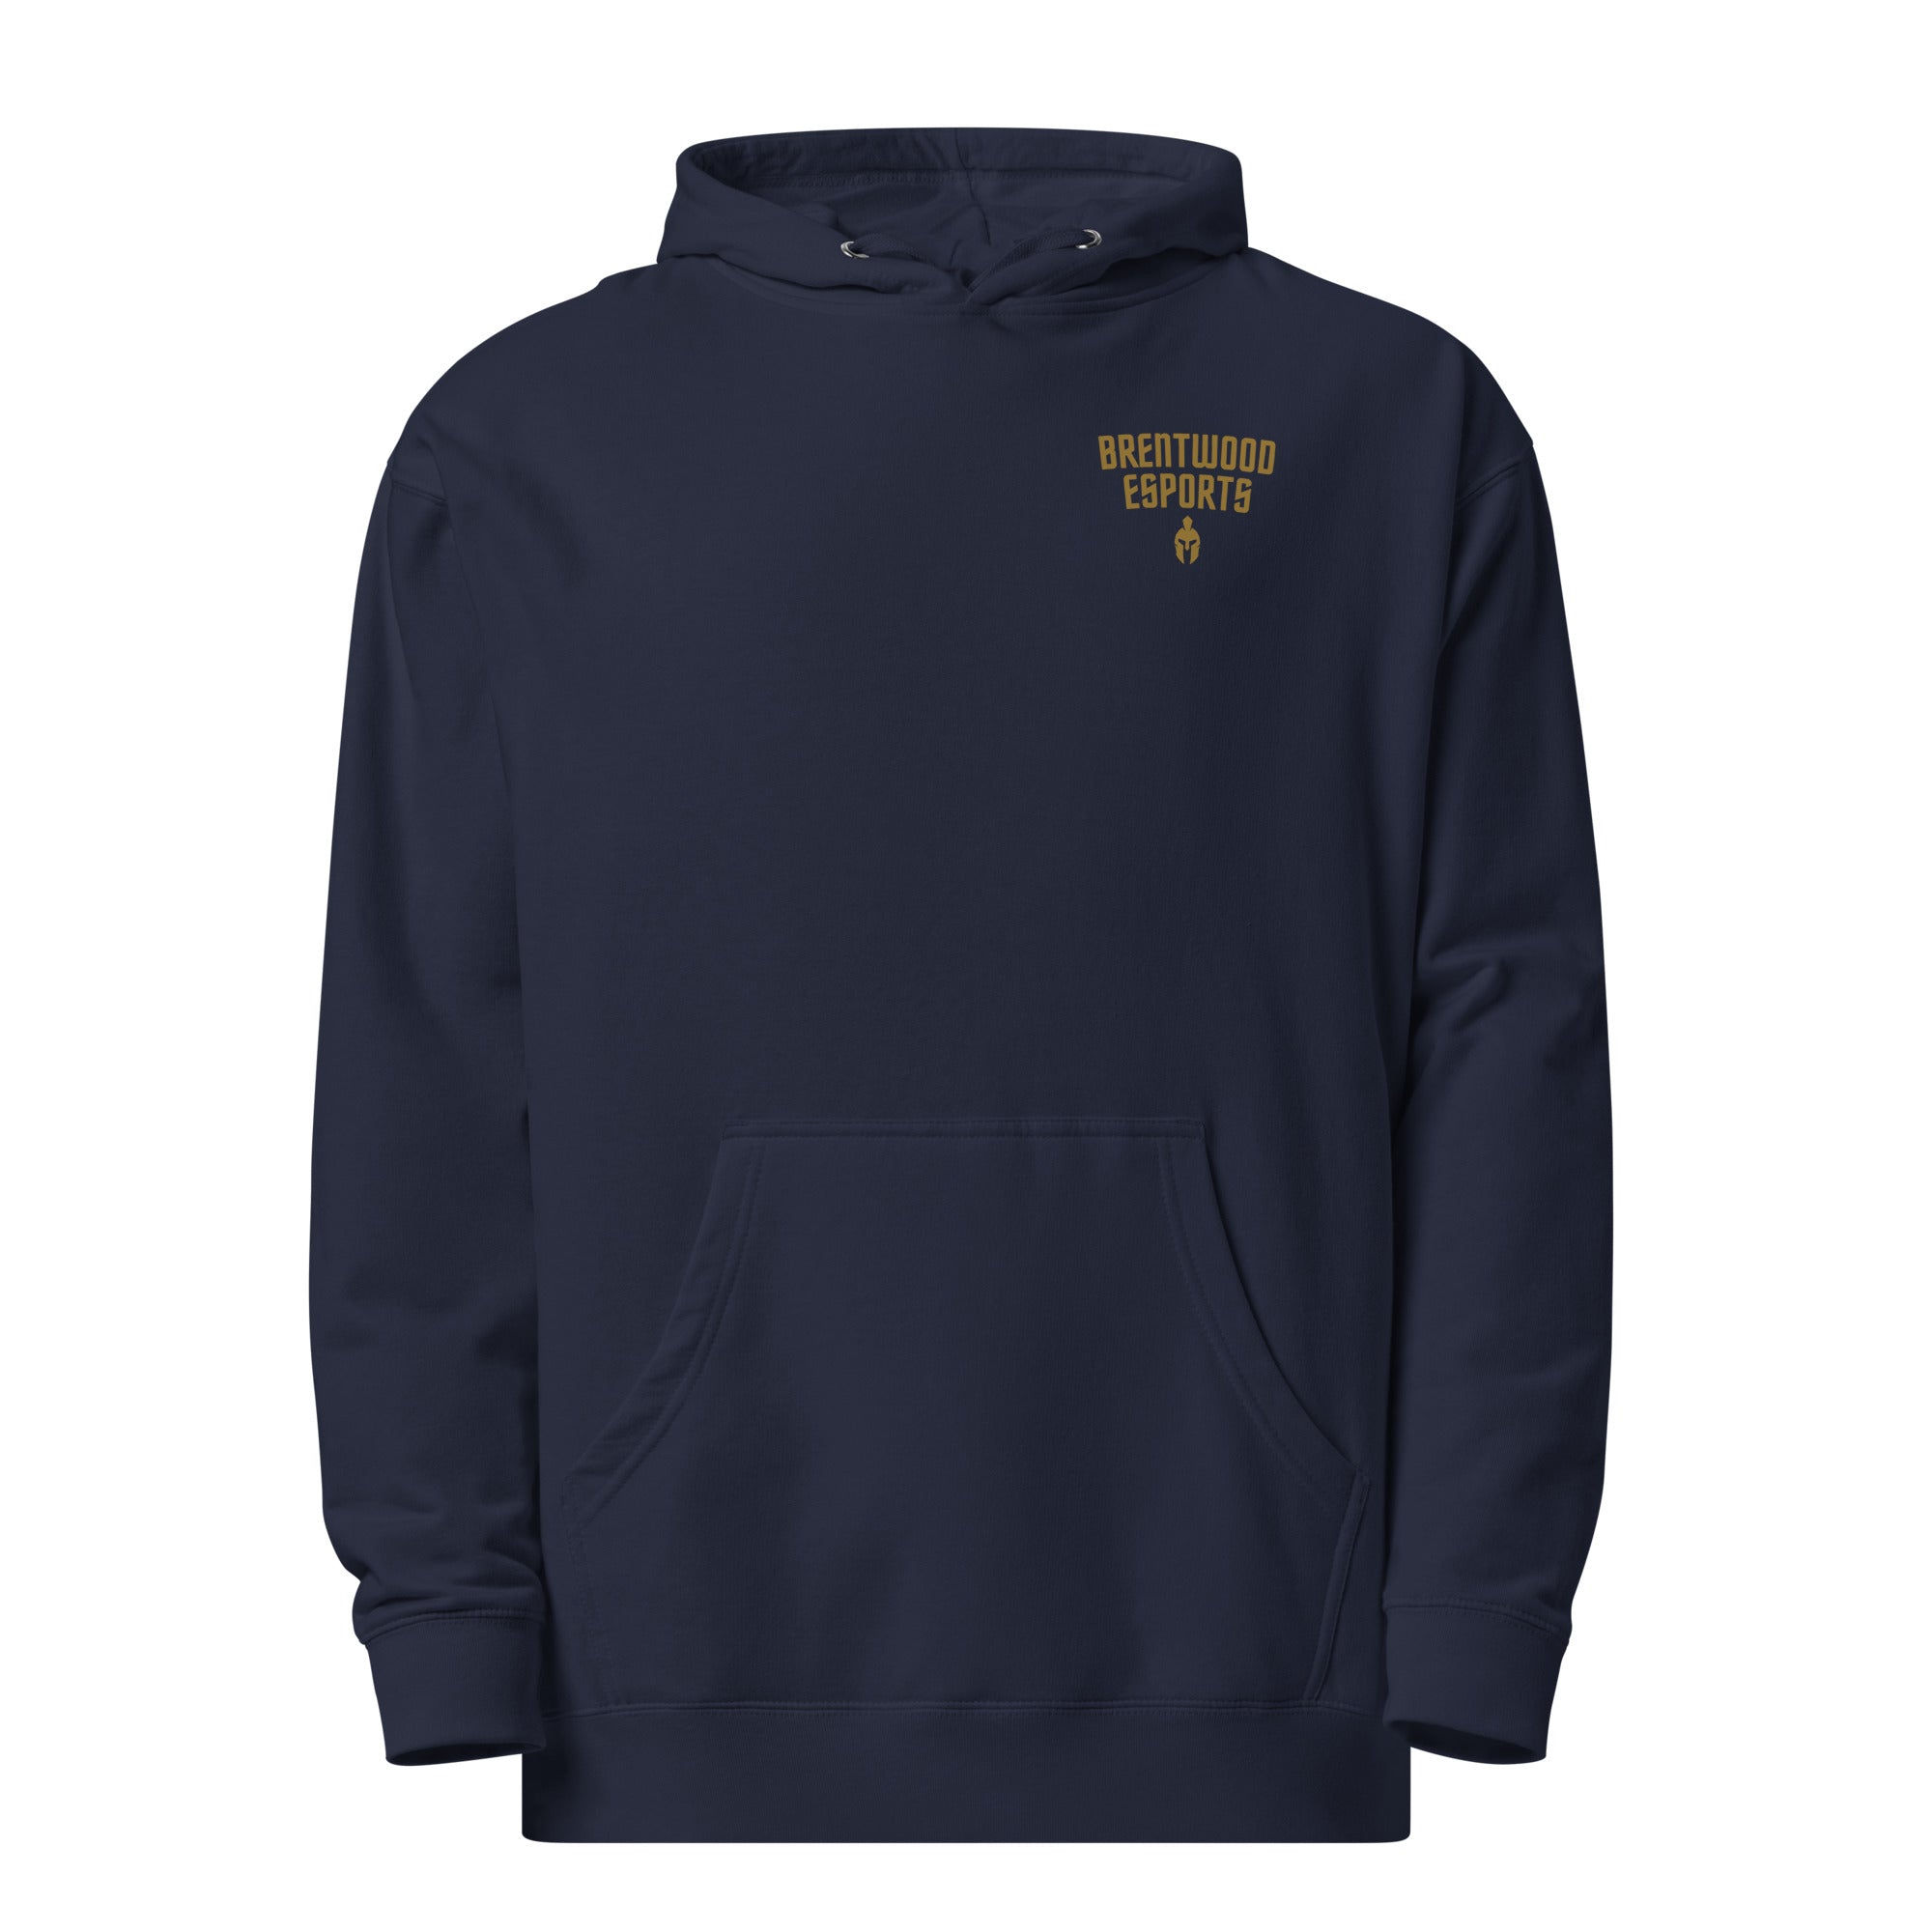 Brentwood Esports Midweight Hoodie